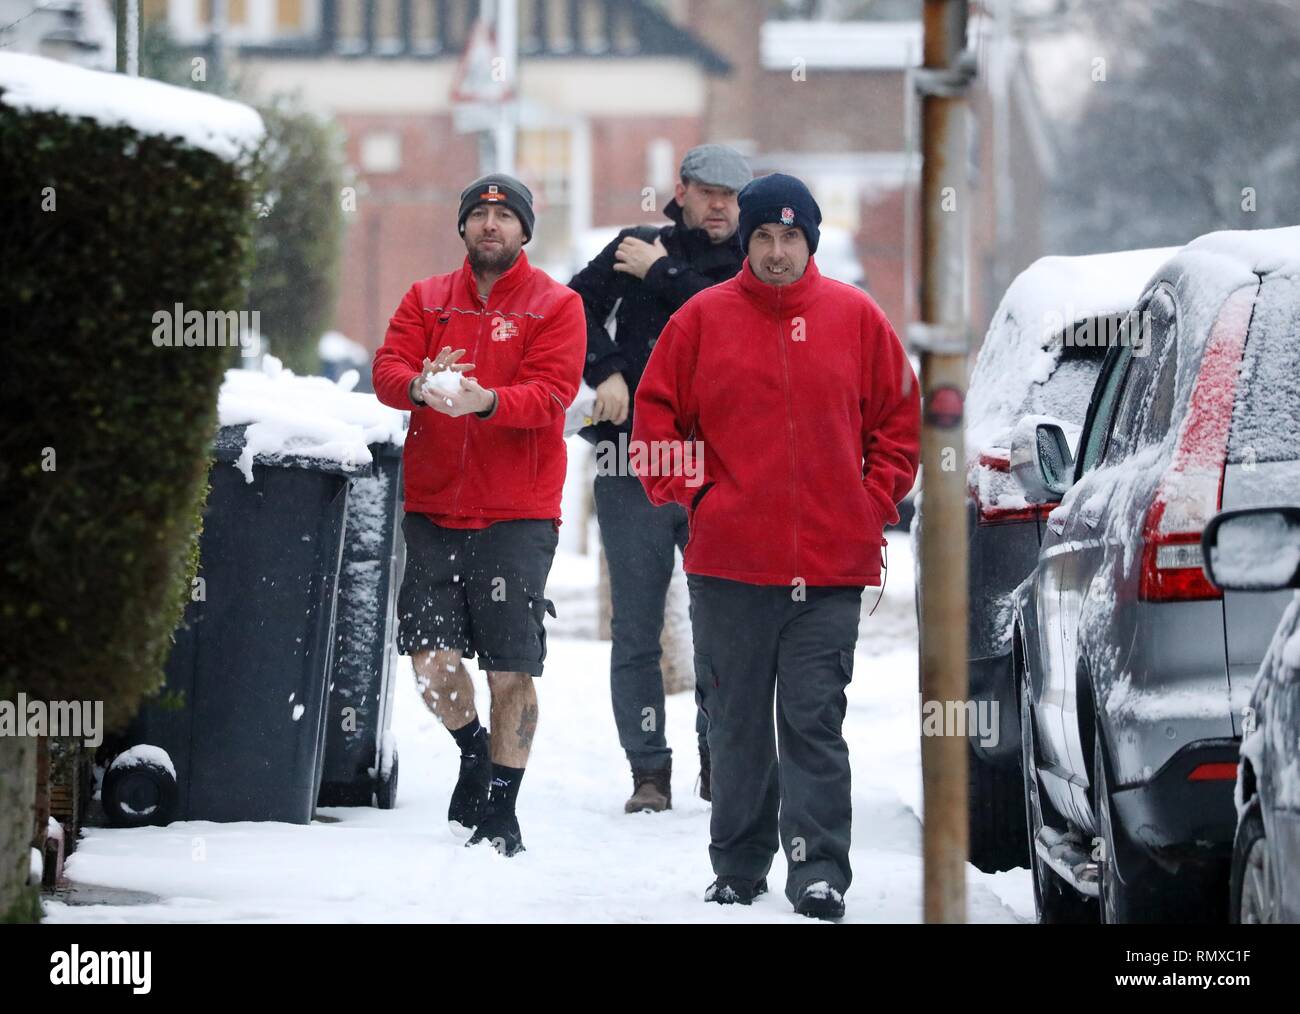 Pic shows: Snow and sleet hampered commuters on their work today in East Finchley, North London  This postman played a prank on his mate not he way to Stock Photo